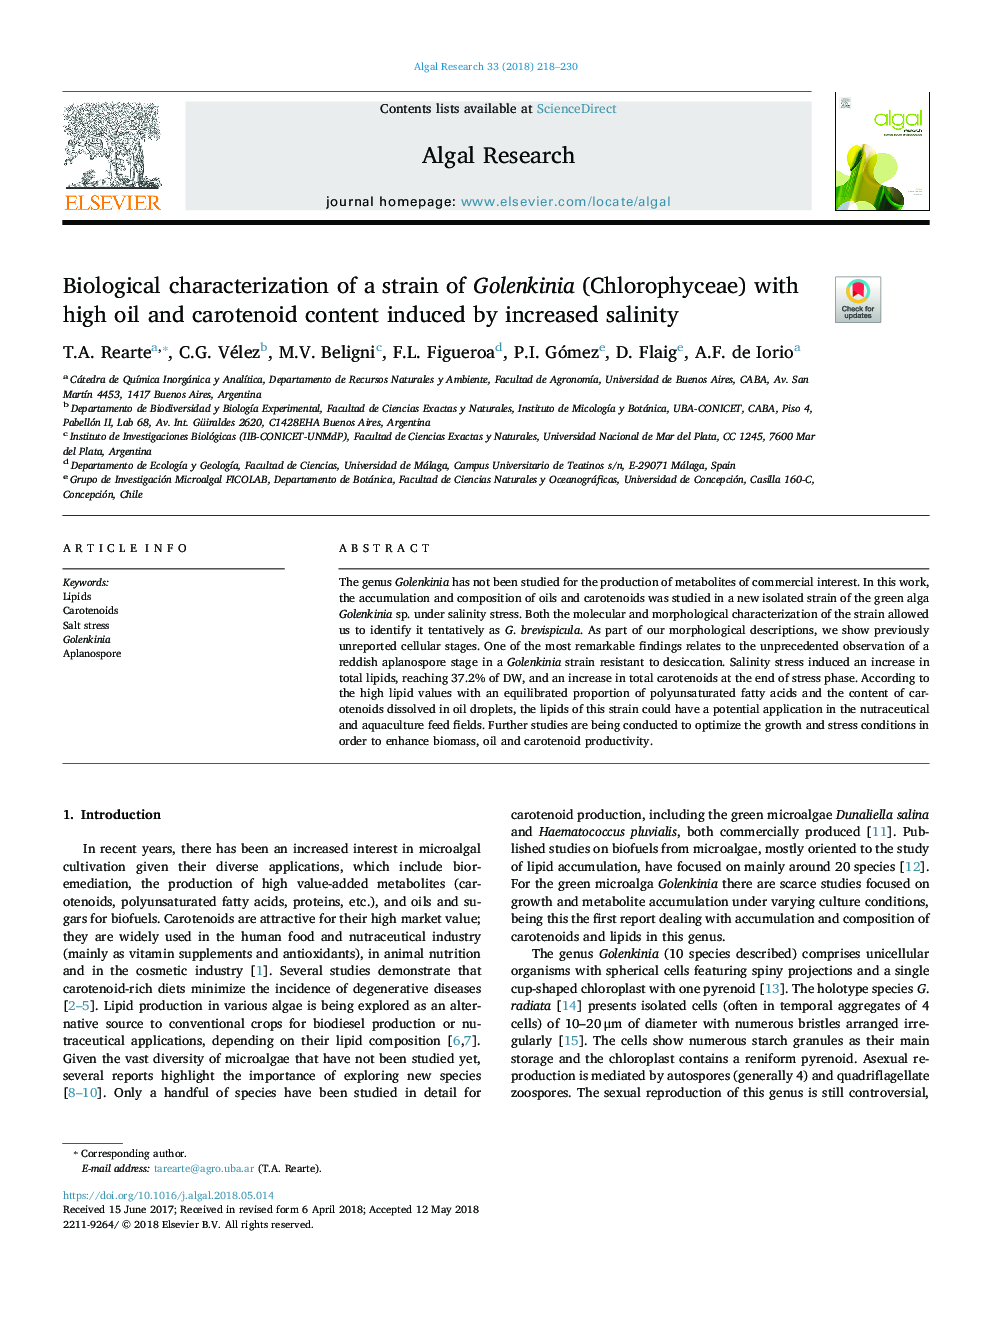 Biological characterization of a strain of Golenkinia (Chlorophyceae) with high oil and carotenoid content induced by increased salinity